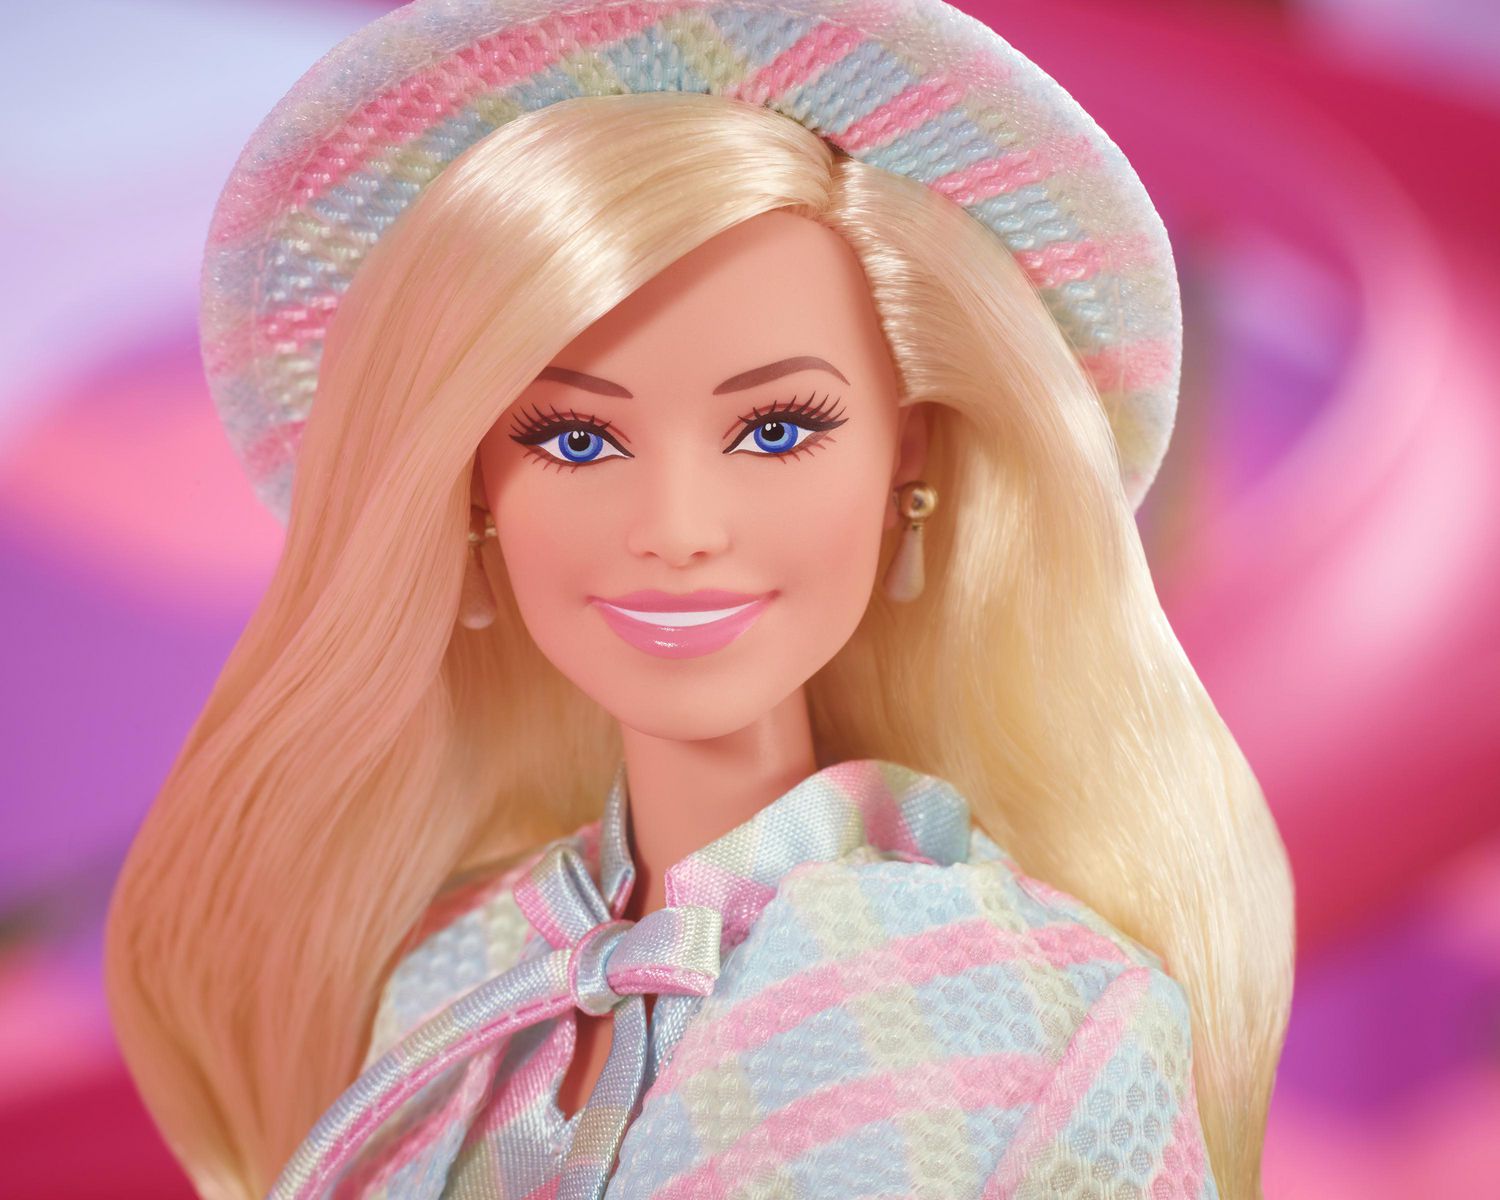 Barbie The Movie Doll, Margot Robbie as Barbie, Collectible Doll